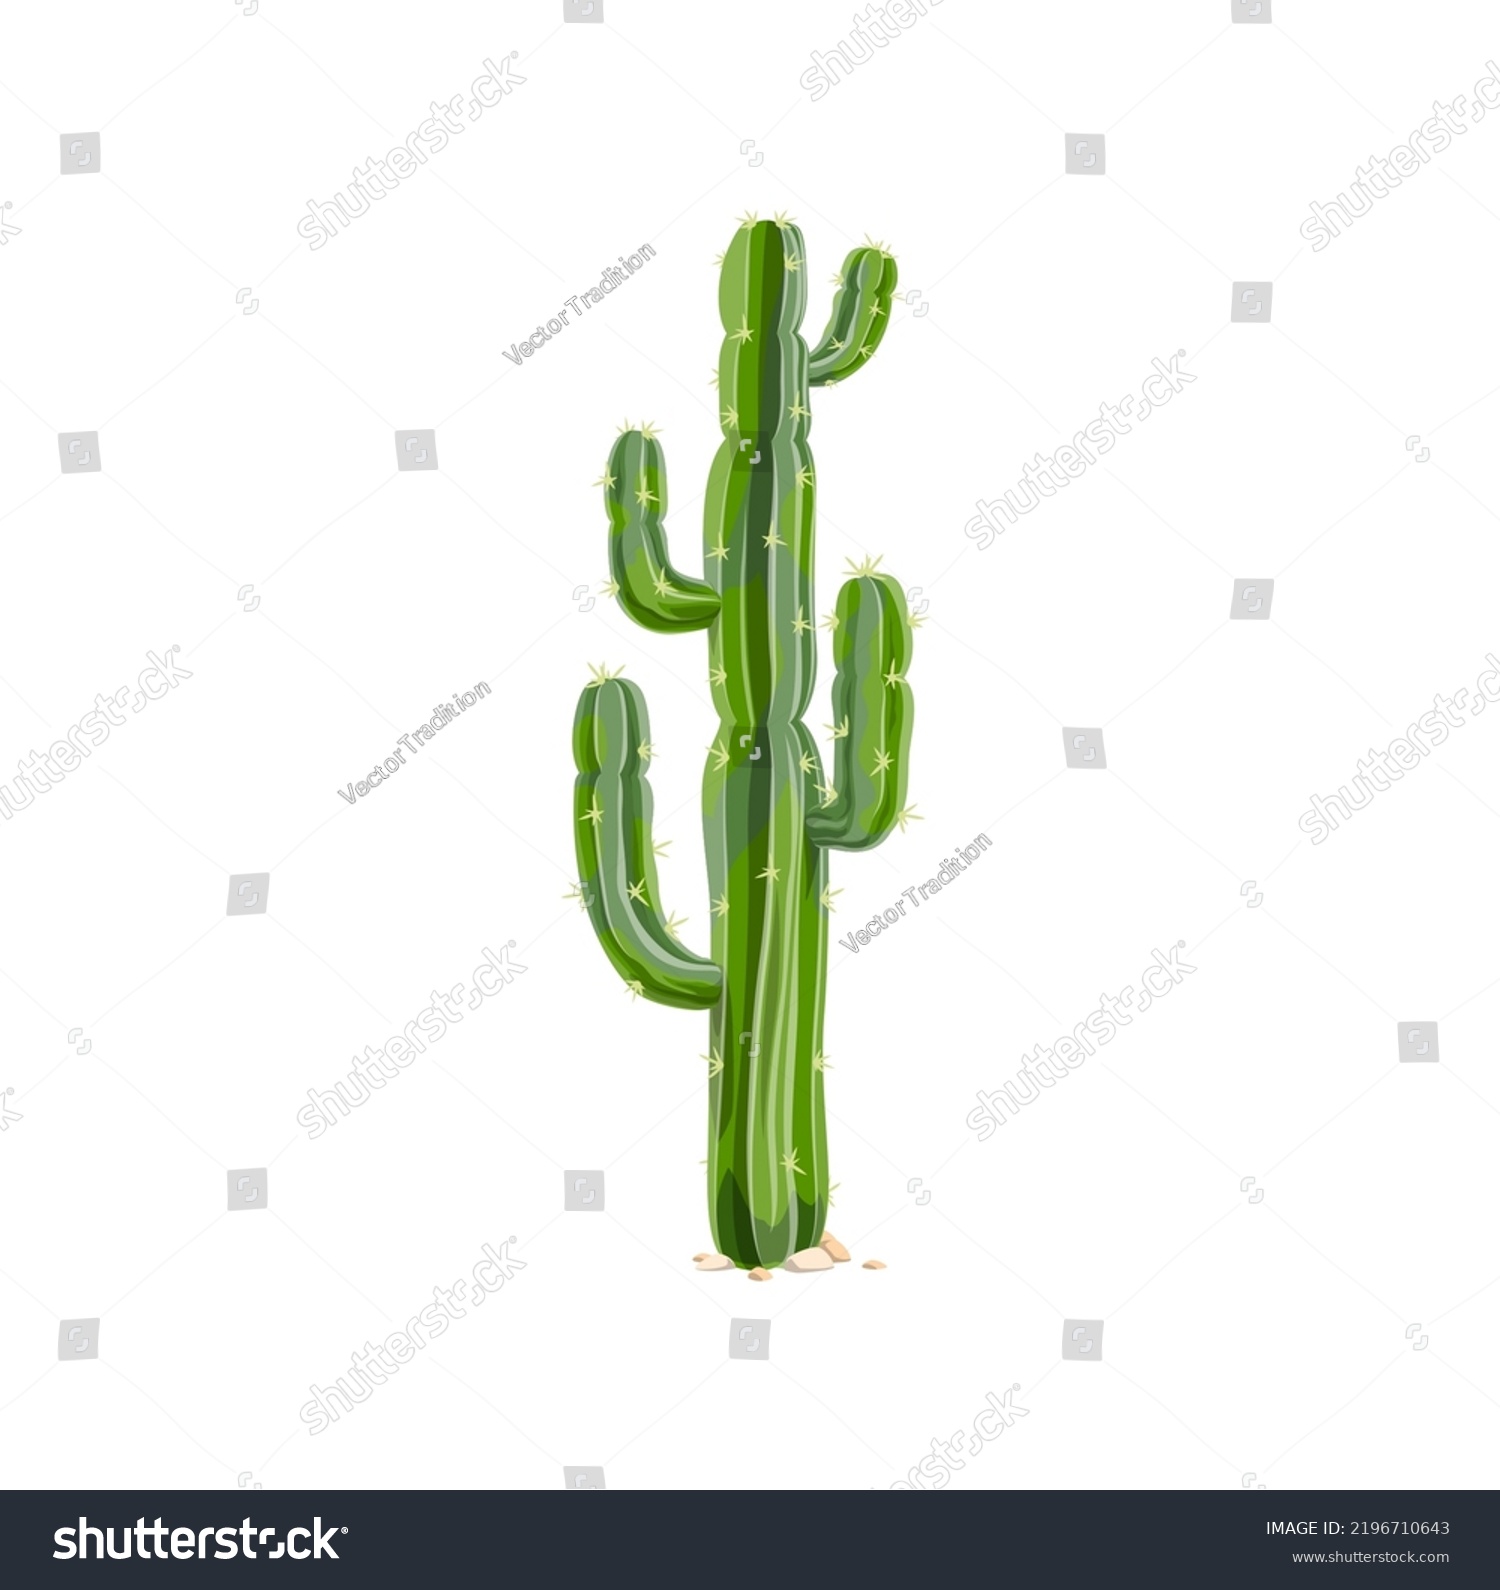 SVG of Elephant cactus, Mexican giant cardon isolated prickly cacti plant cartoon icon. Vector tropical succulent grown in desert, indians cacti with thorns, prickly succulent plant tall spiky tree svg